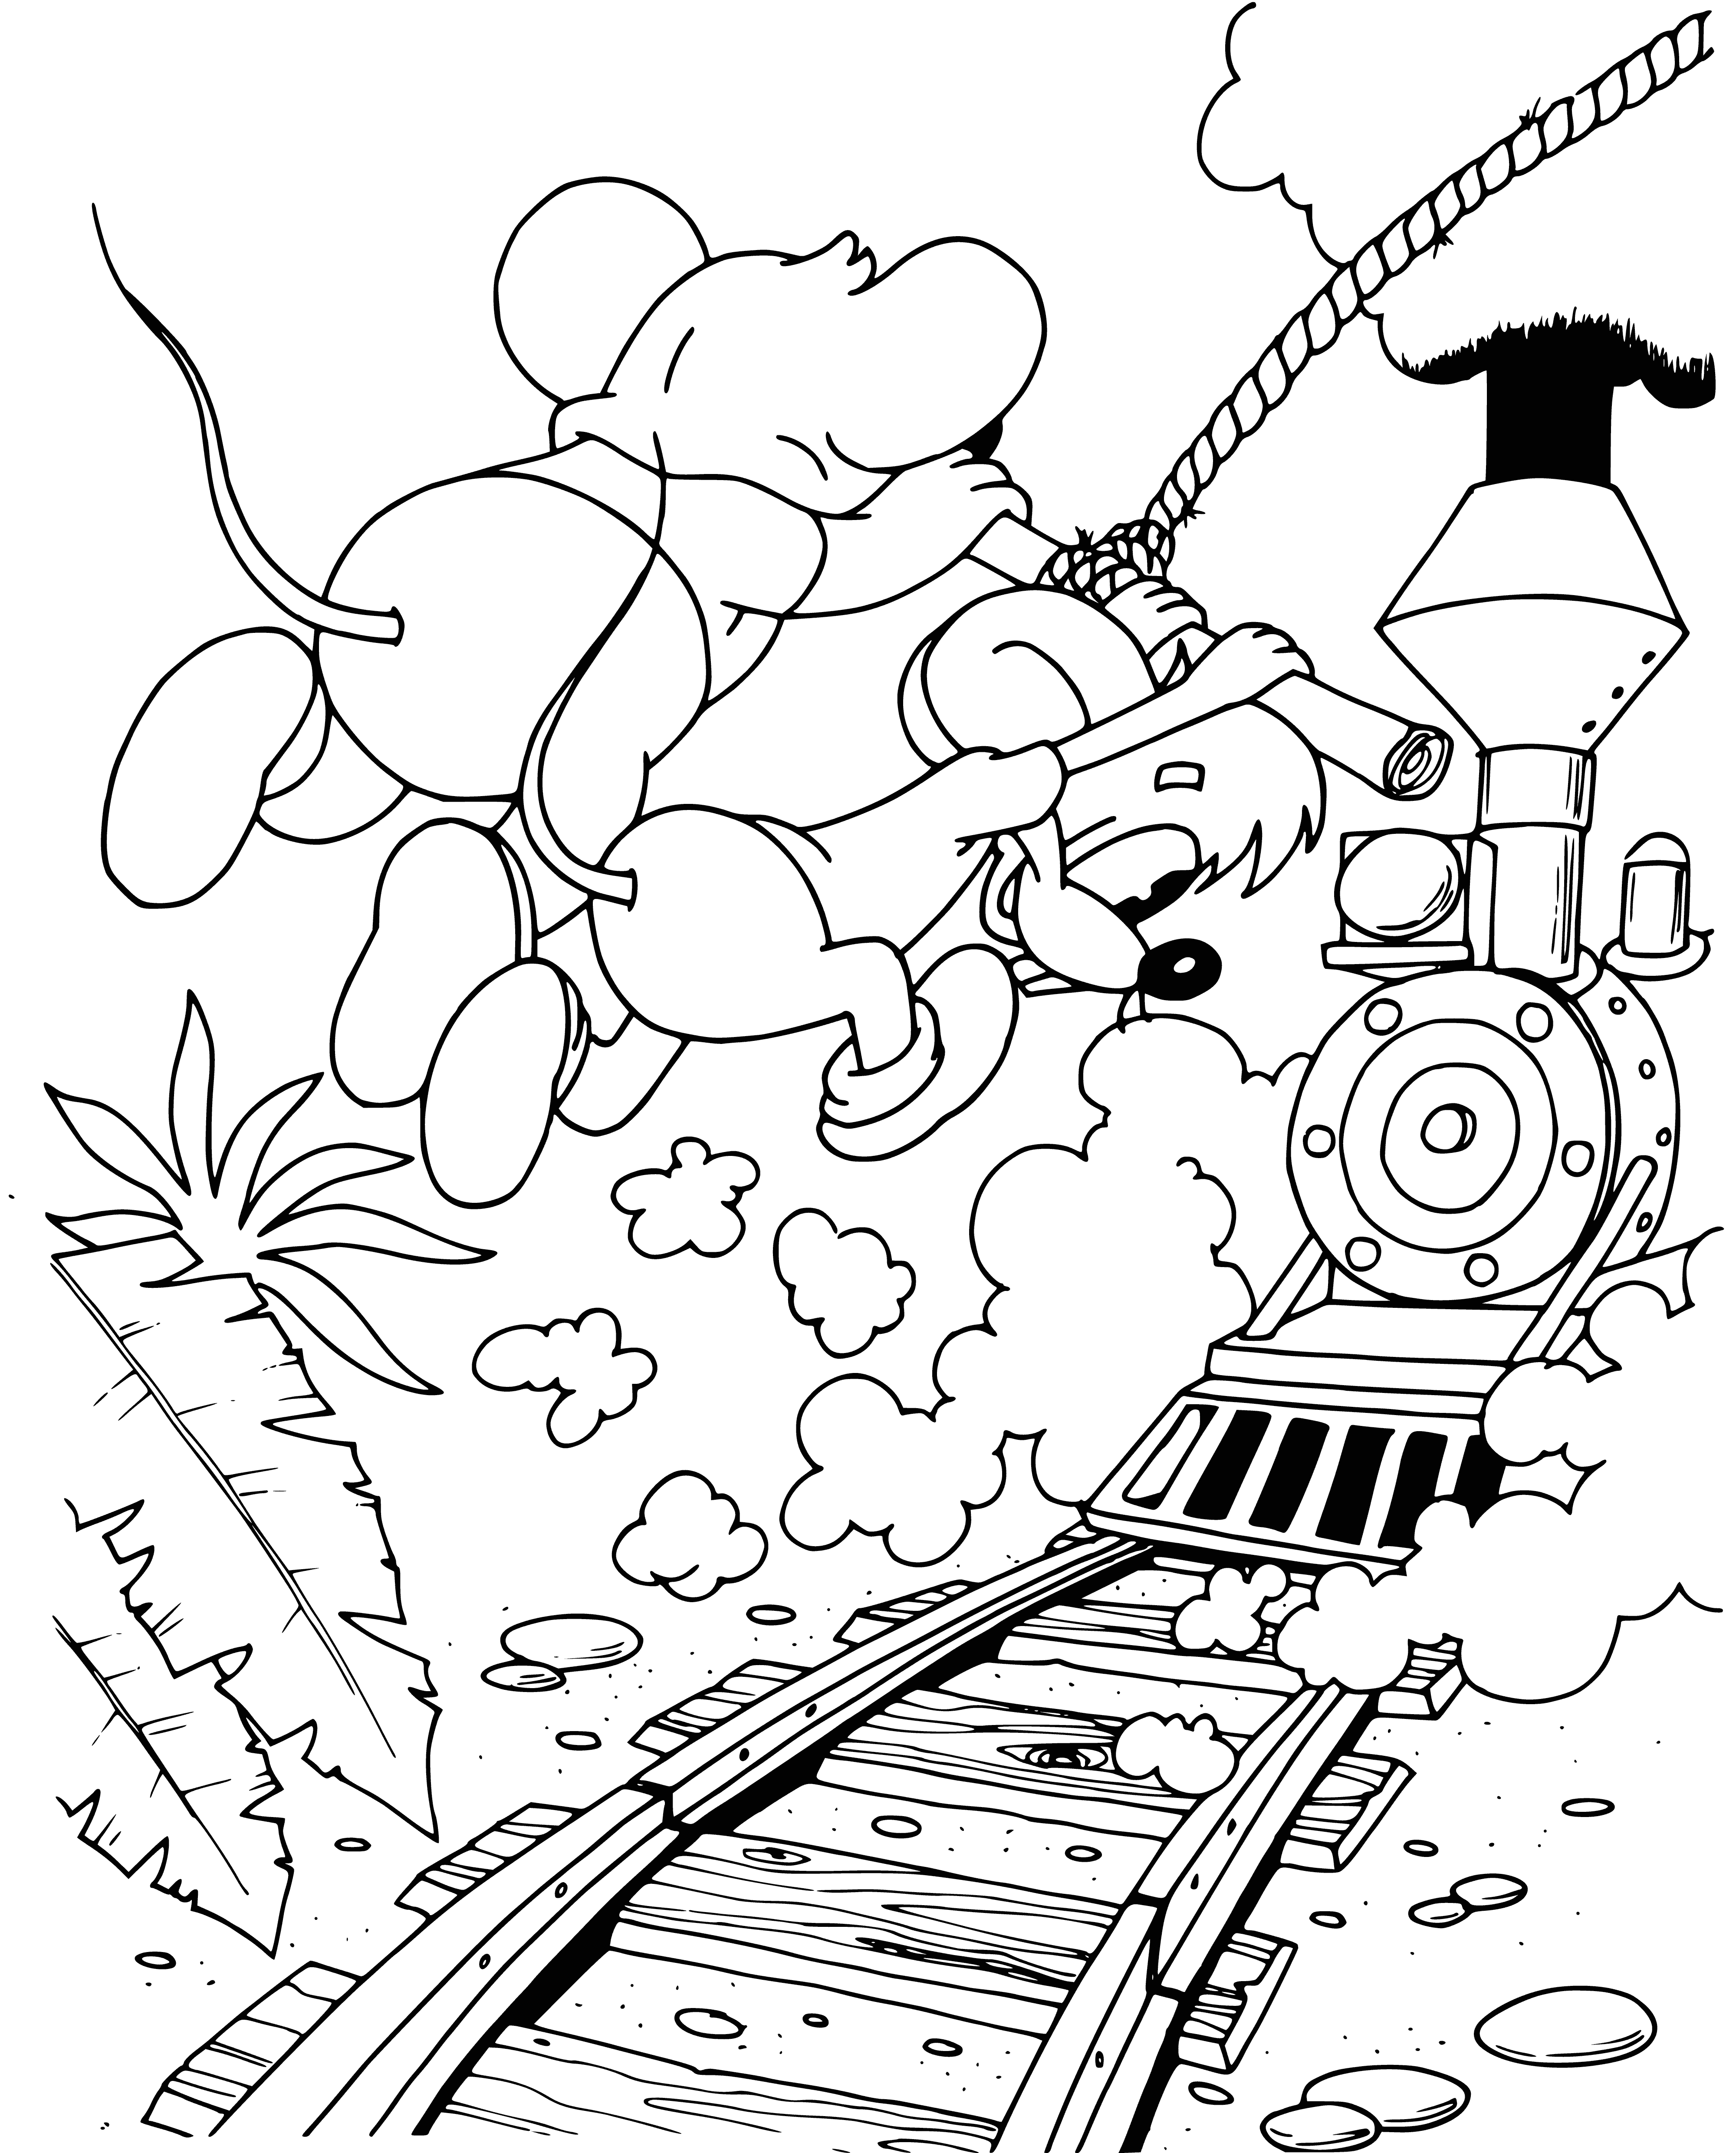 coloring page: Leopold the Cat stars in "Tarzanka", ready to take on whatever comes his way as he stands on a branch, looking at a jungle waterfall. #animals #adventure